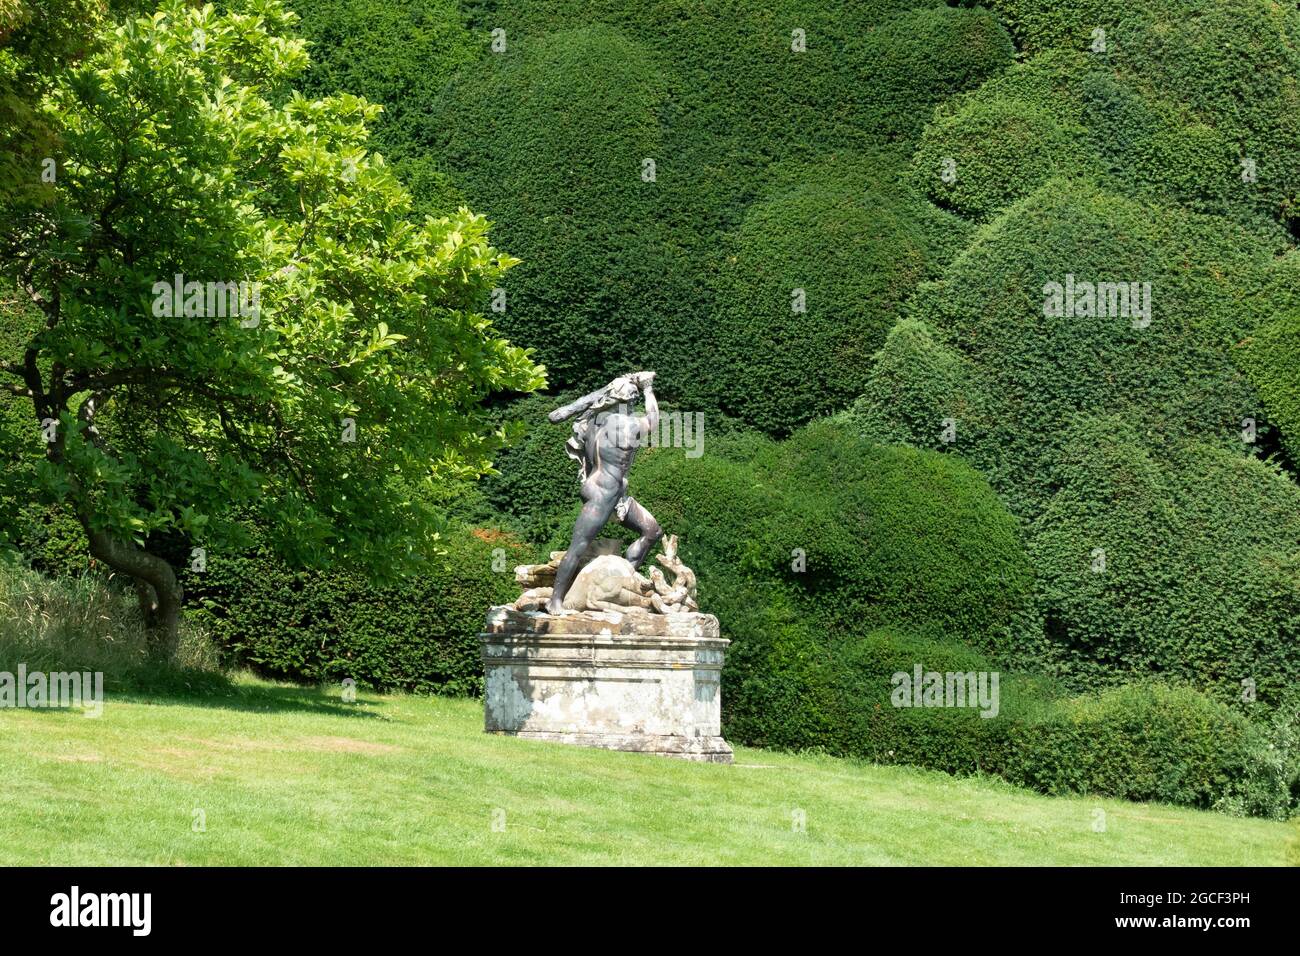 A statue in the grounds of Powis Castle depicting Hercules battling the Hydra. Powis Castle, Wales. Stock Photo